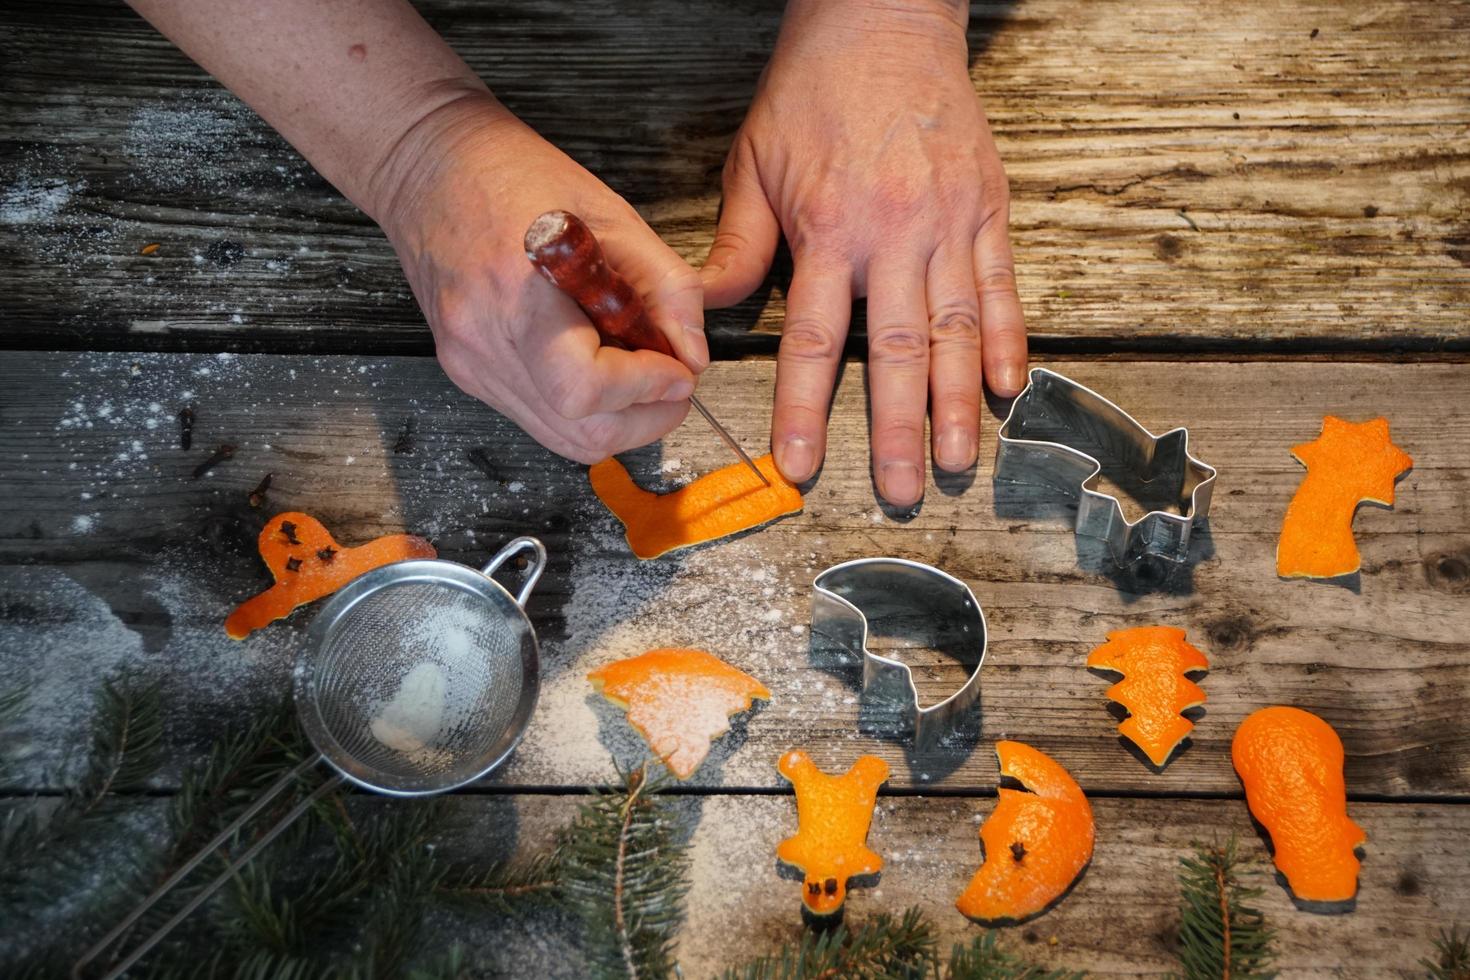 Woman Hands And Christmas Decorative Figures Made Of Orange Peel On The Old Wood Table. photo